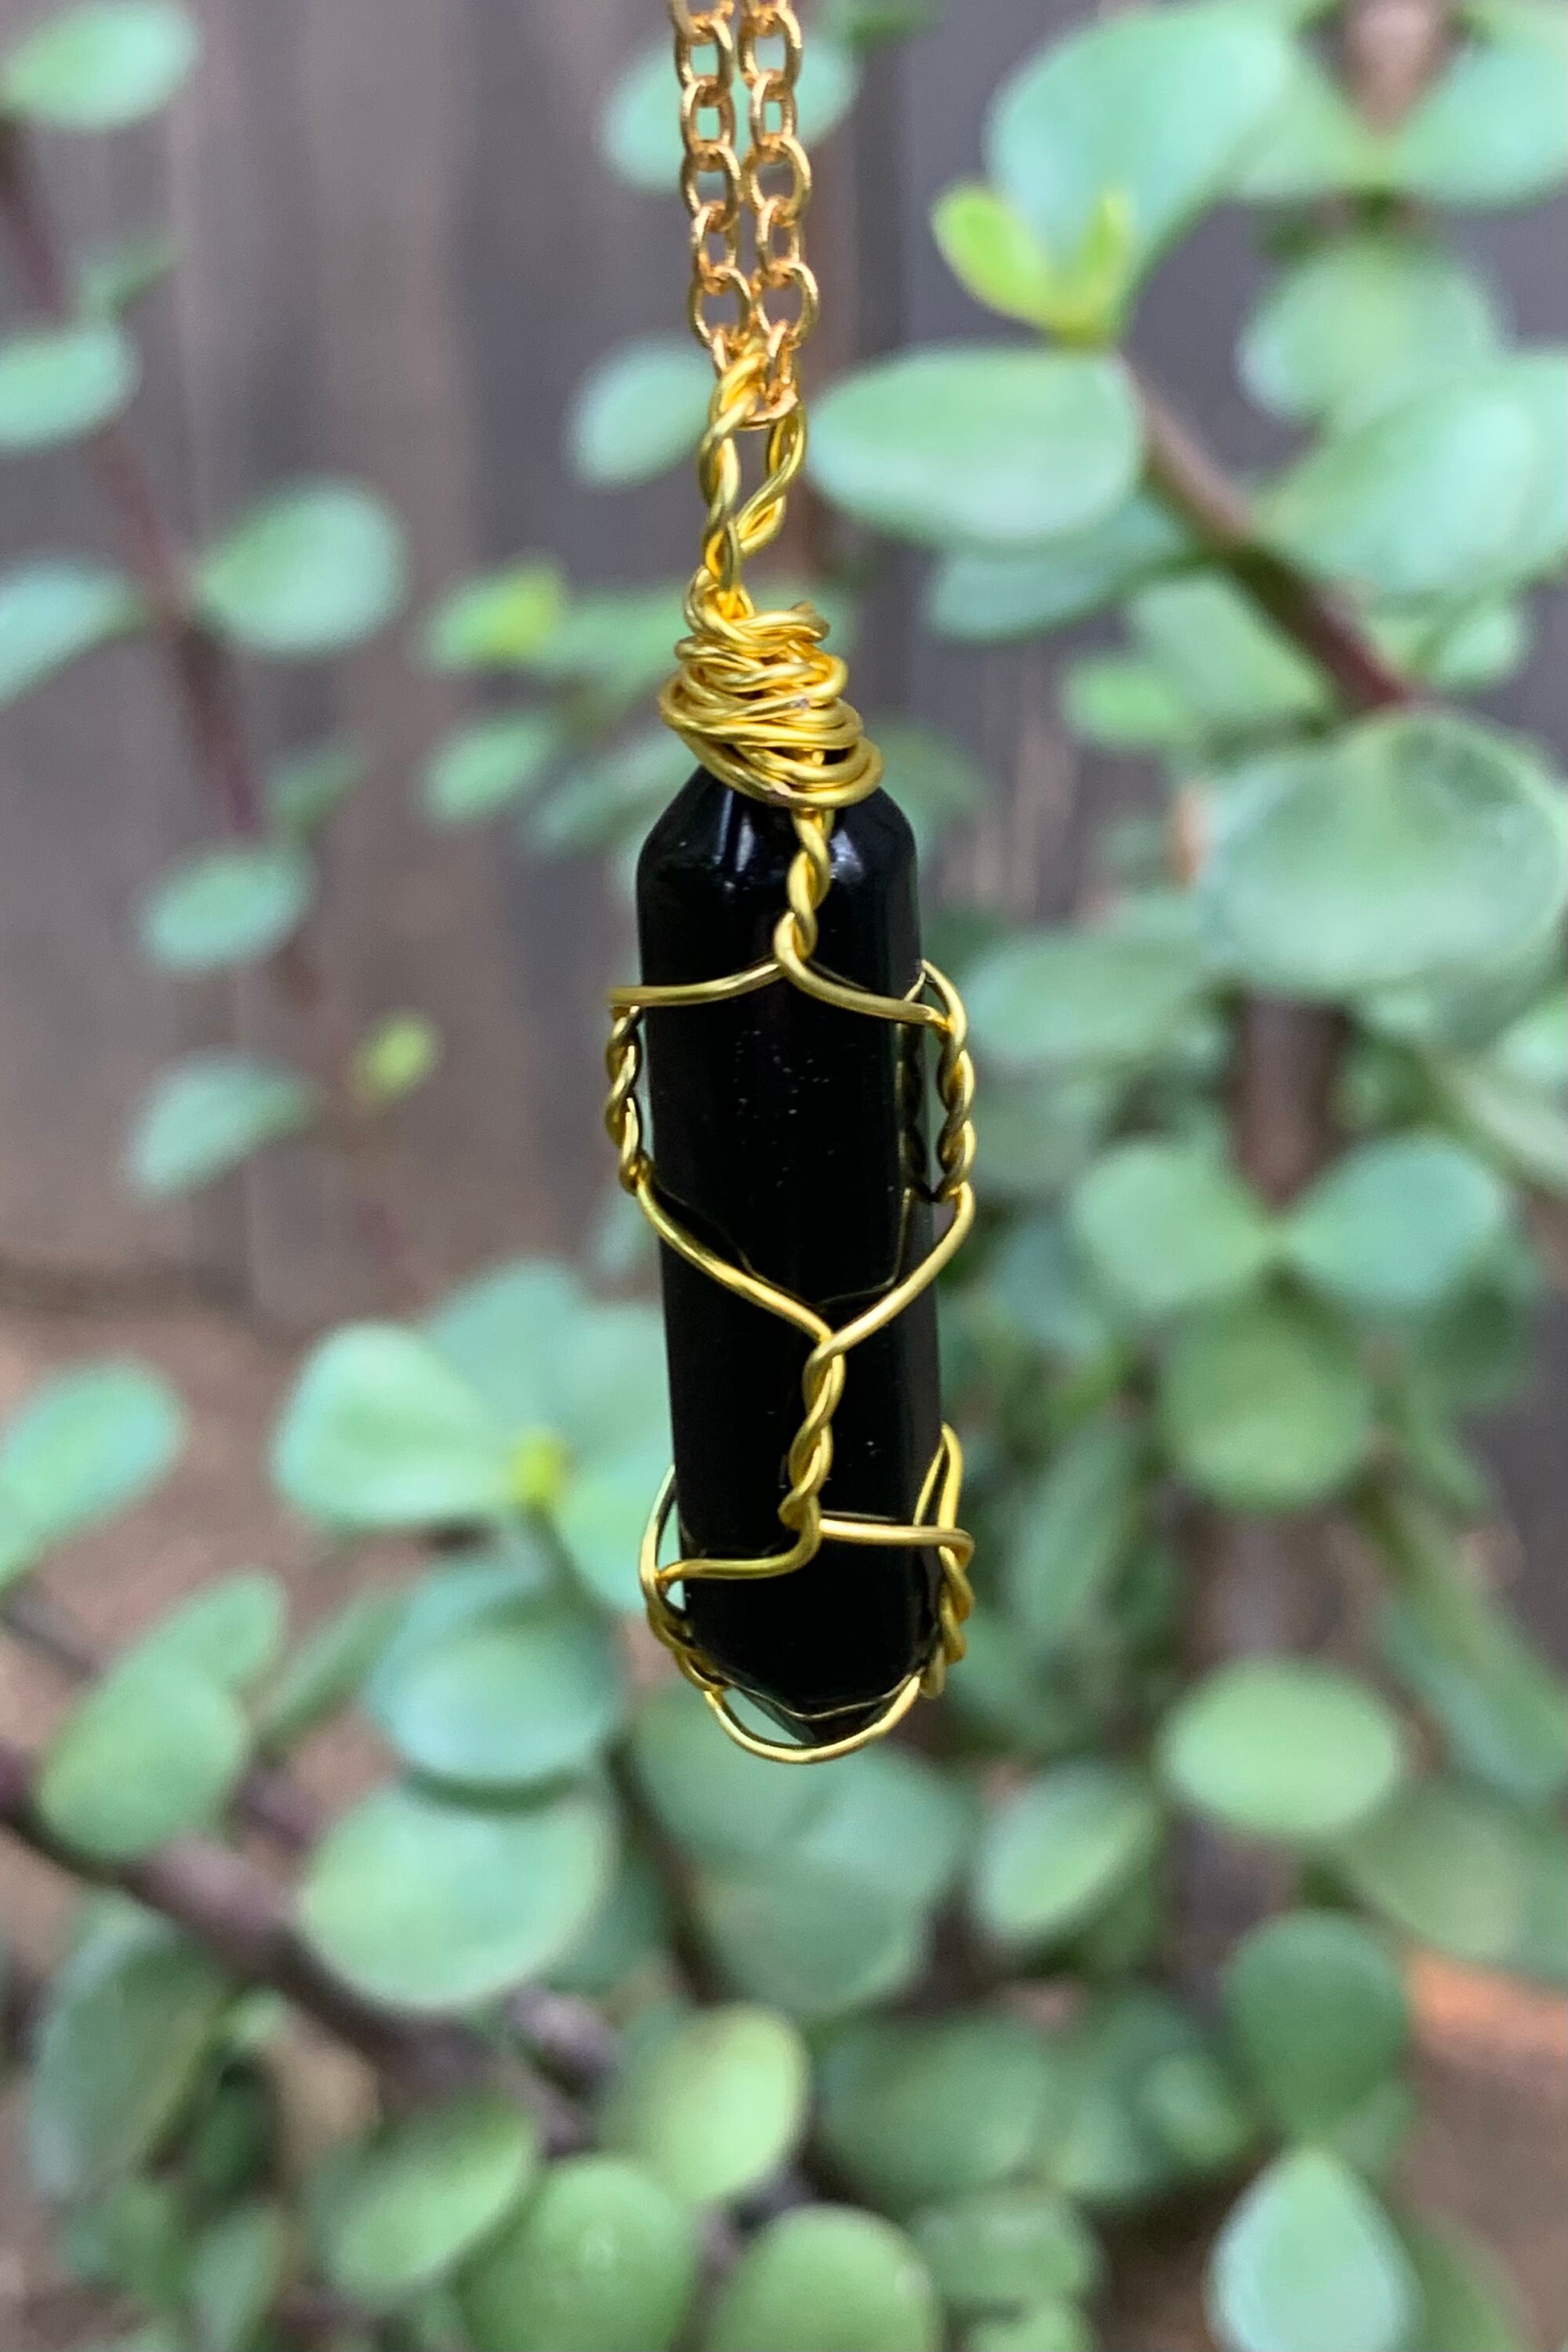 Black and White Dendritic Agate Copper Wire Wrapped Boho Pendant Necklace -  Iris Elm Jewelry & Soap